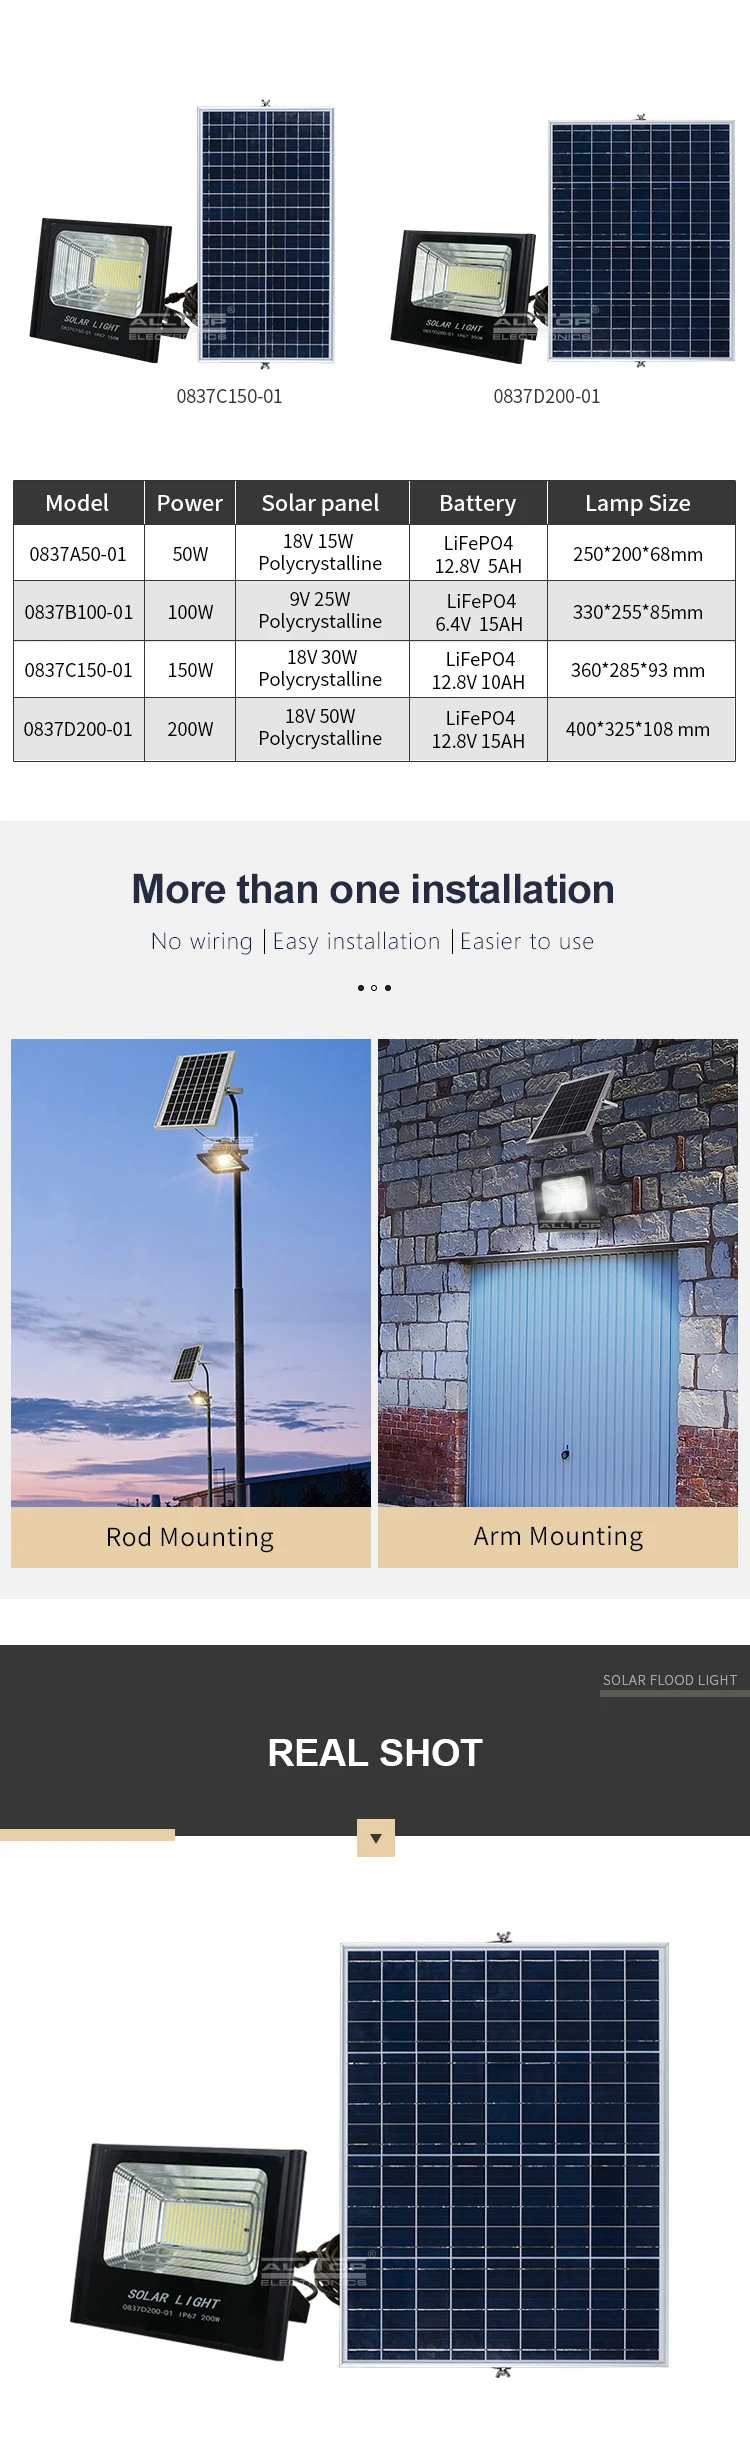 ALLTOP Top quality customize aluminium outdoor ip65 dimmable 50w 100w 150w 200w Led Solar Flood Light